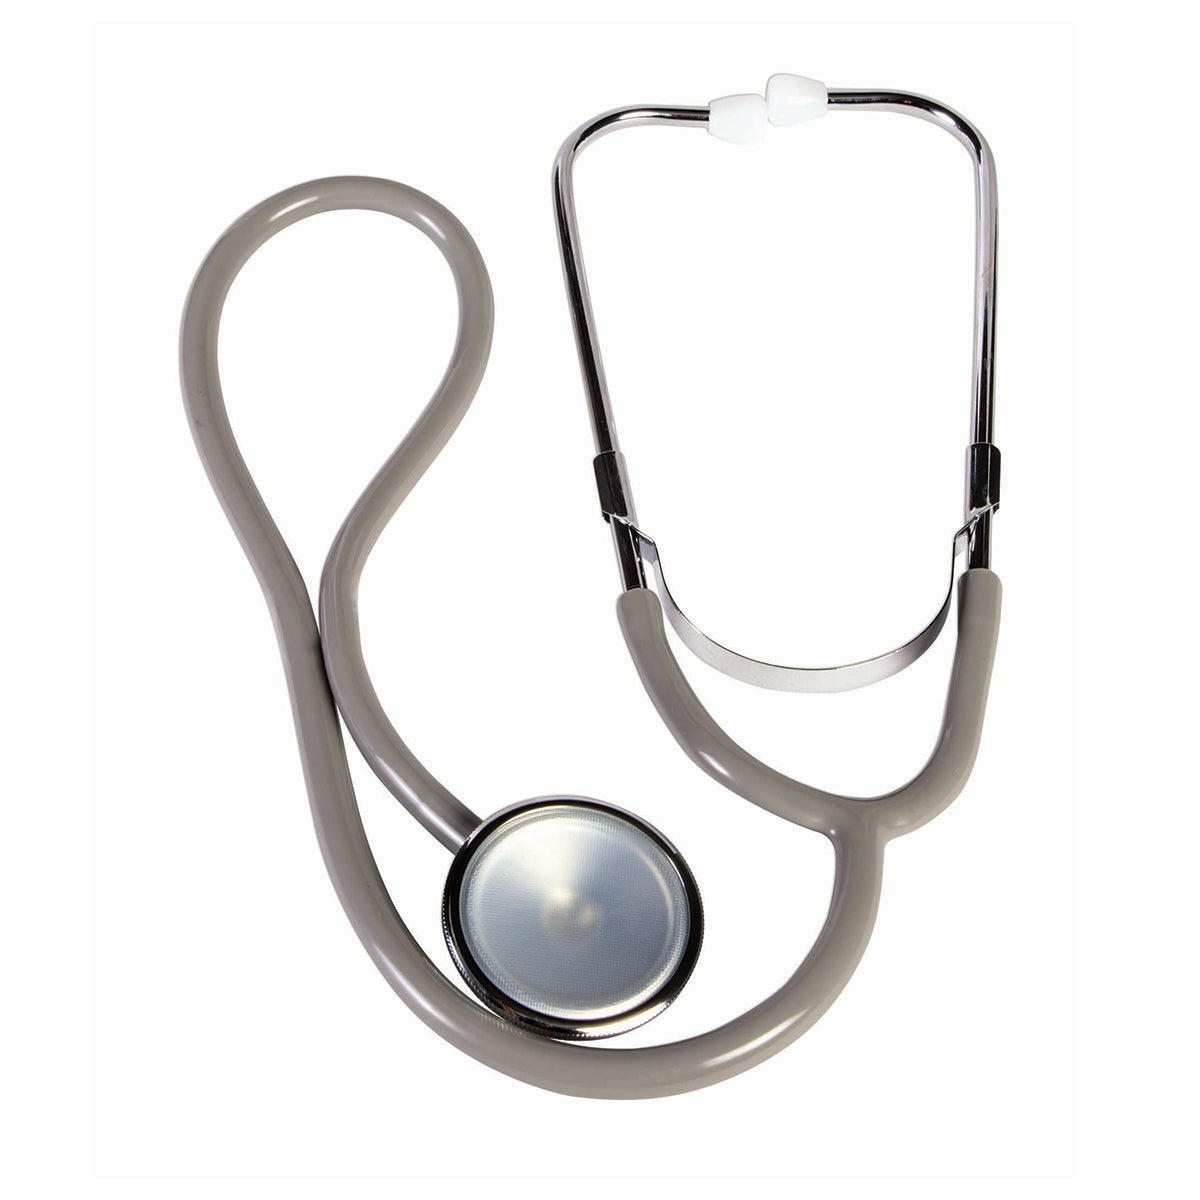 RUBIES II (Ruby Slipper Sales) Costume Accessories Deluxe Stethoscope for Doctor and Nurse 721773619625